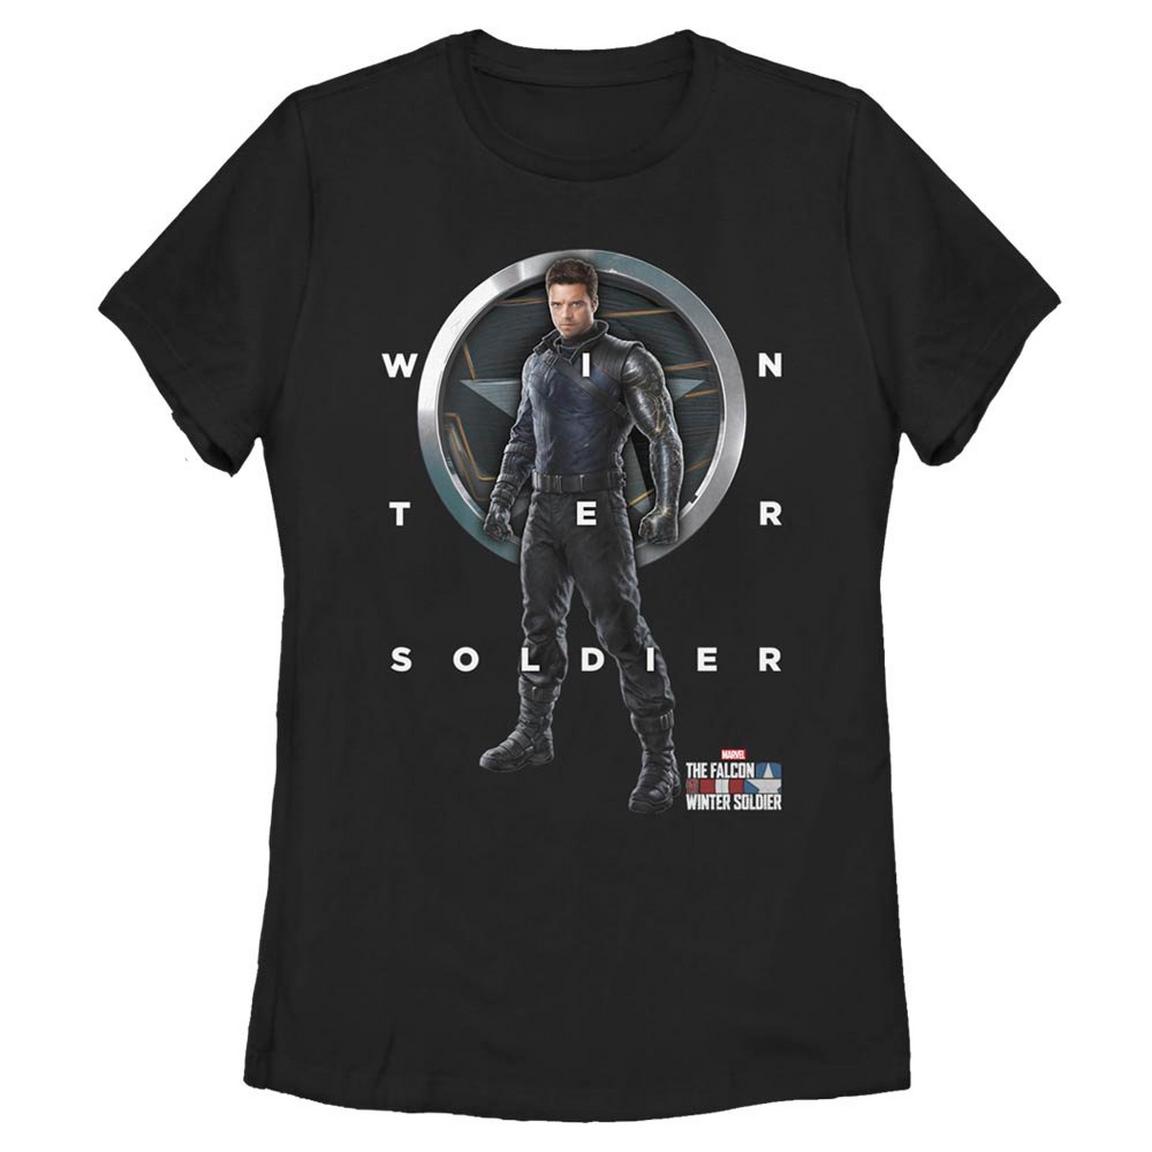 Marvel The Falcon and the Winter Soldier Bucky Poster Women's T-Shirt, Fifth Sun